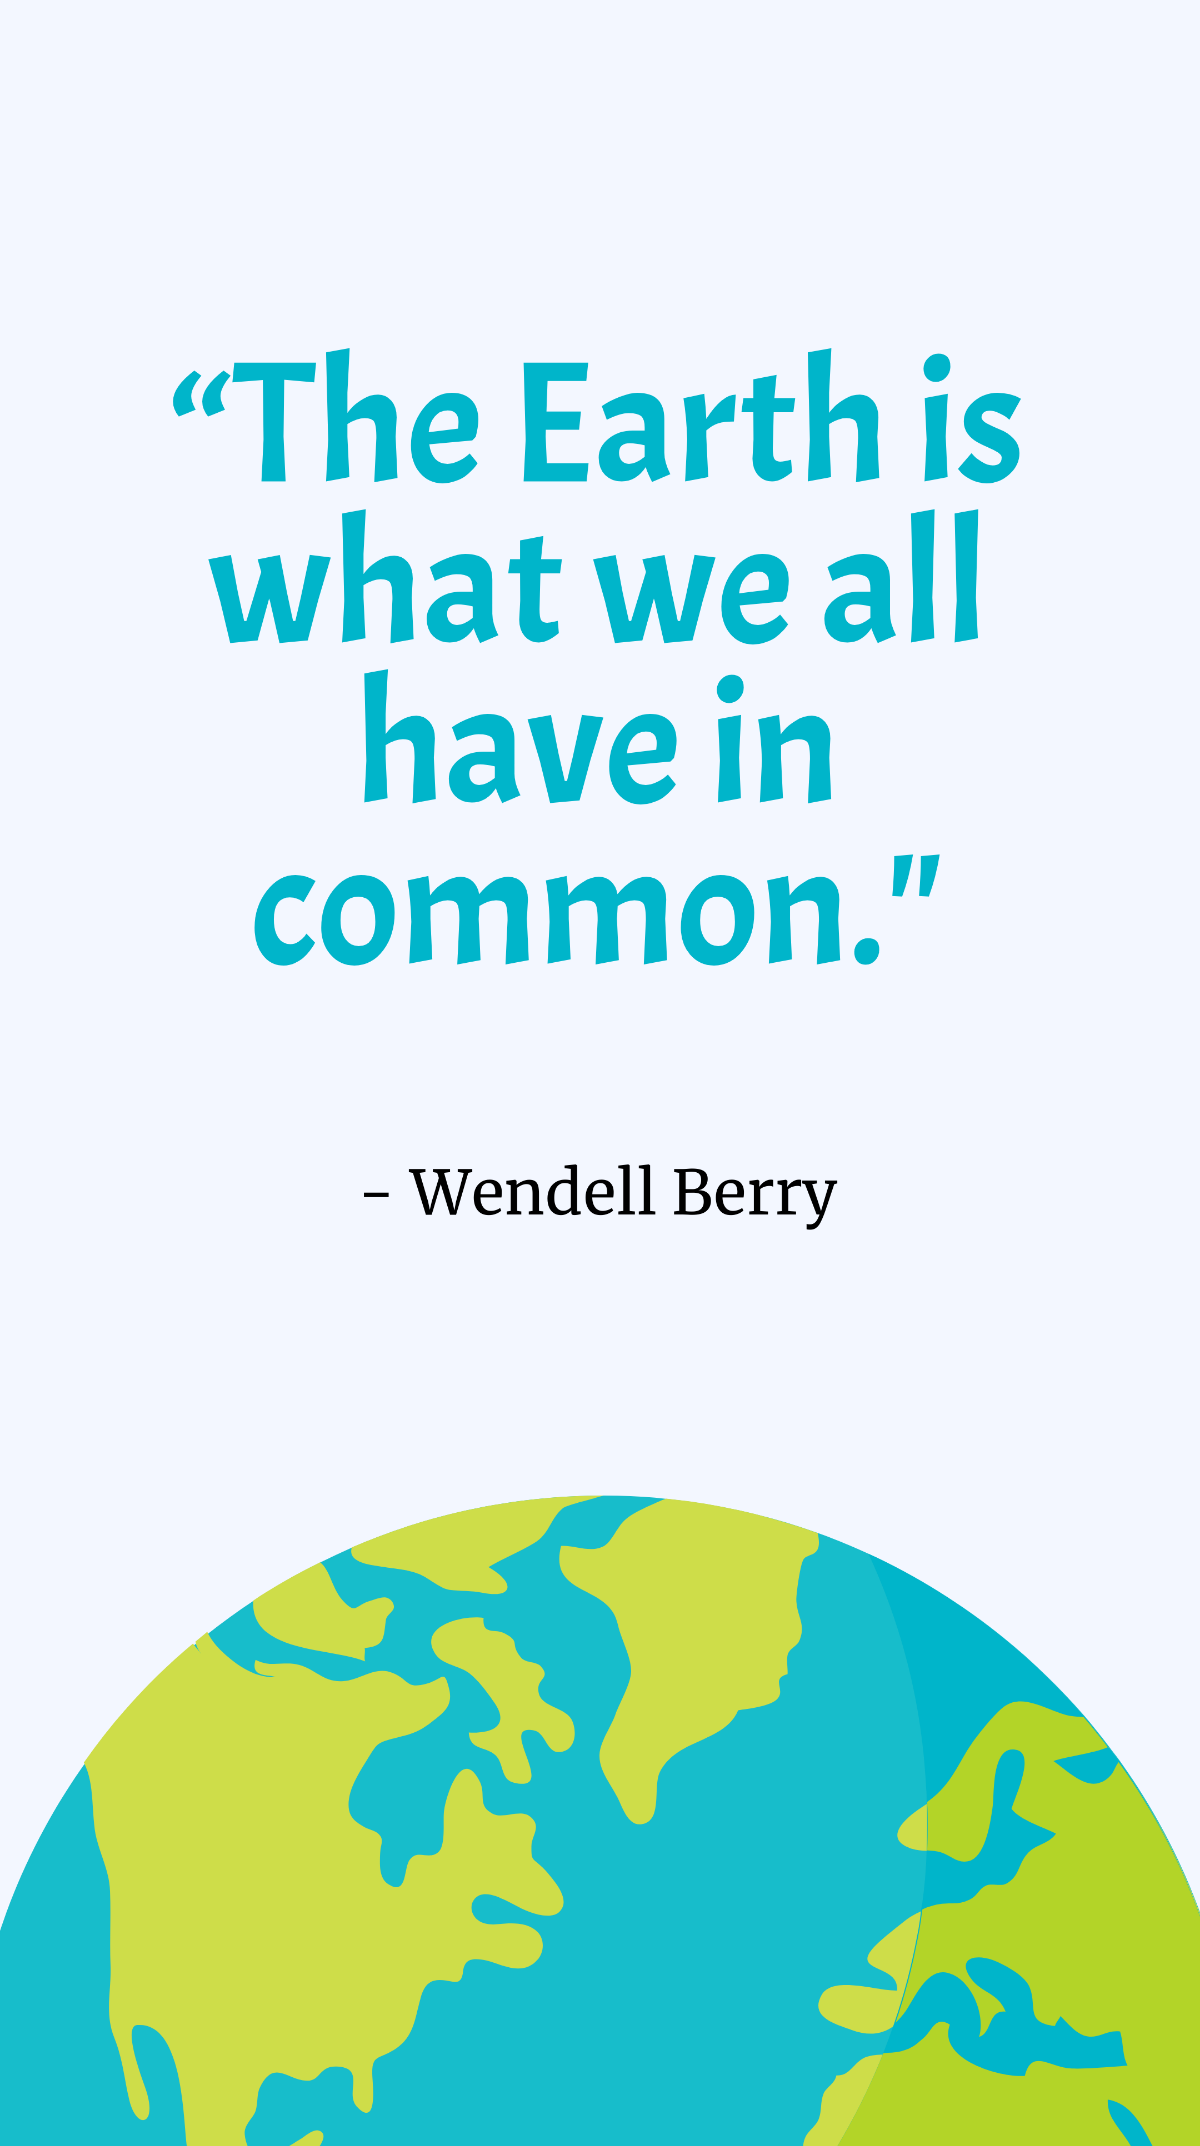 Free Wendell Berry - “The Earth is what we all have in common.